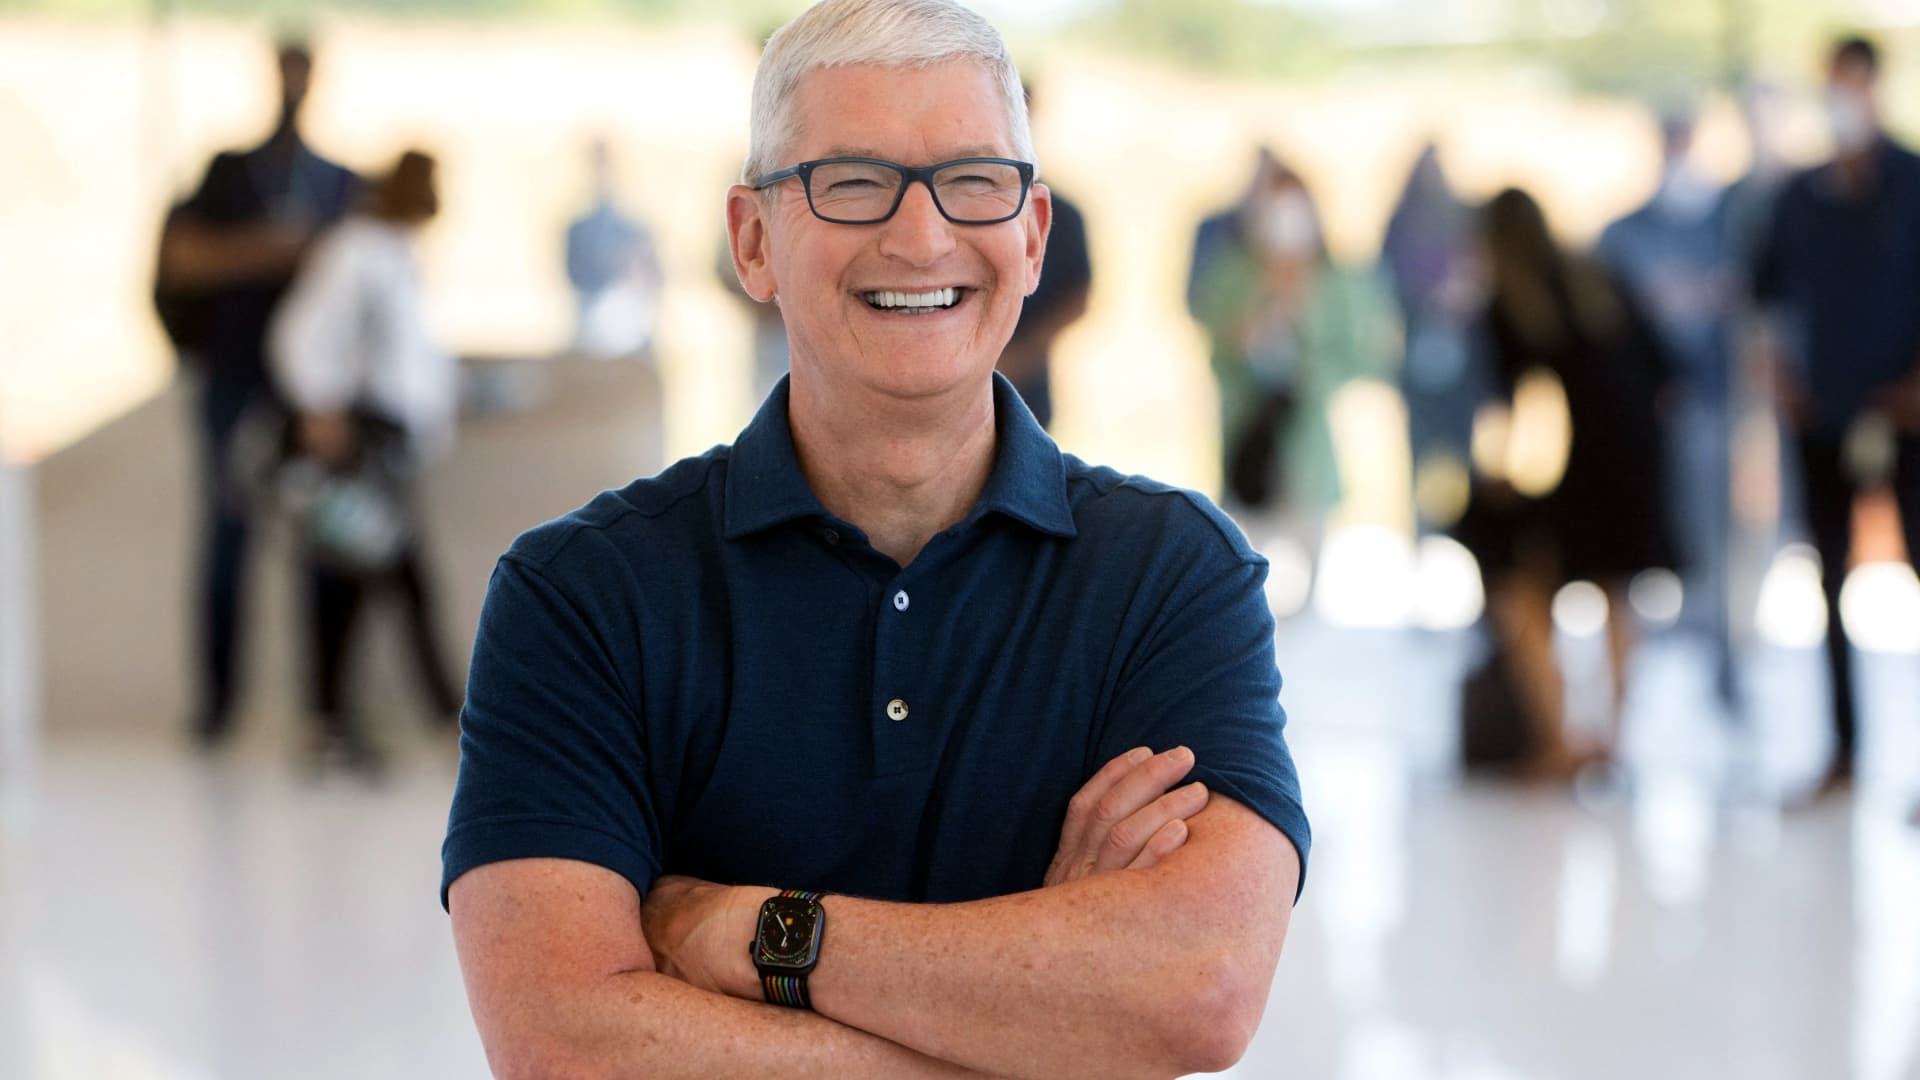 Apple CEO Tim Cook explains why people might want a mixed reality headset